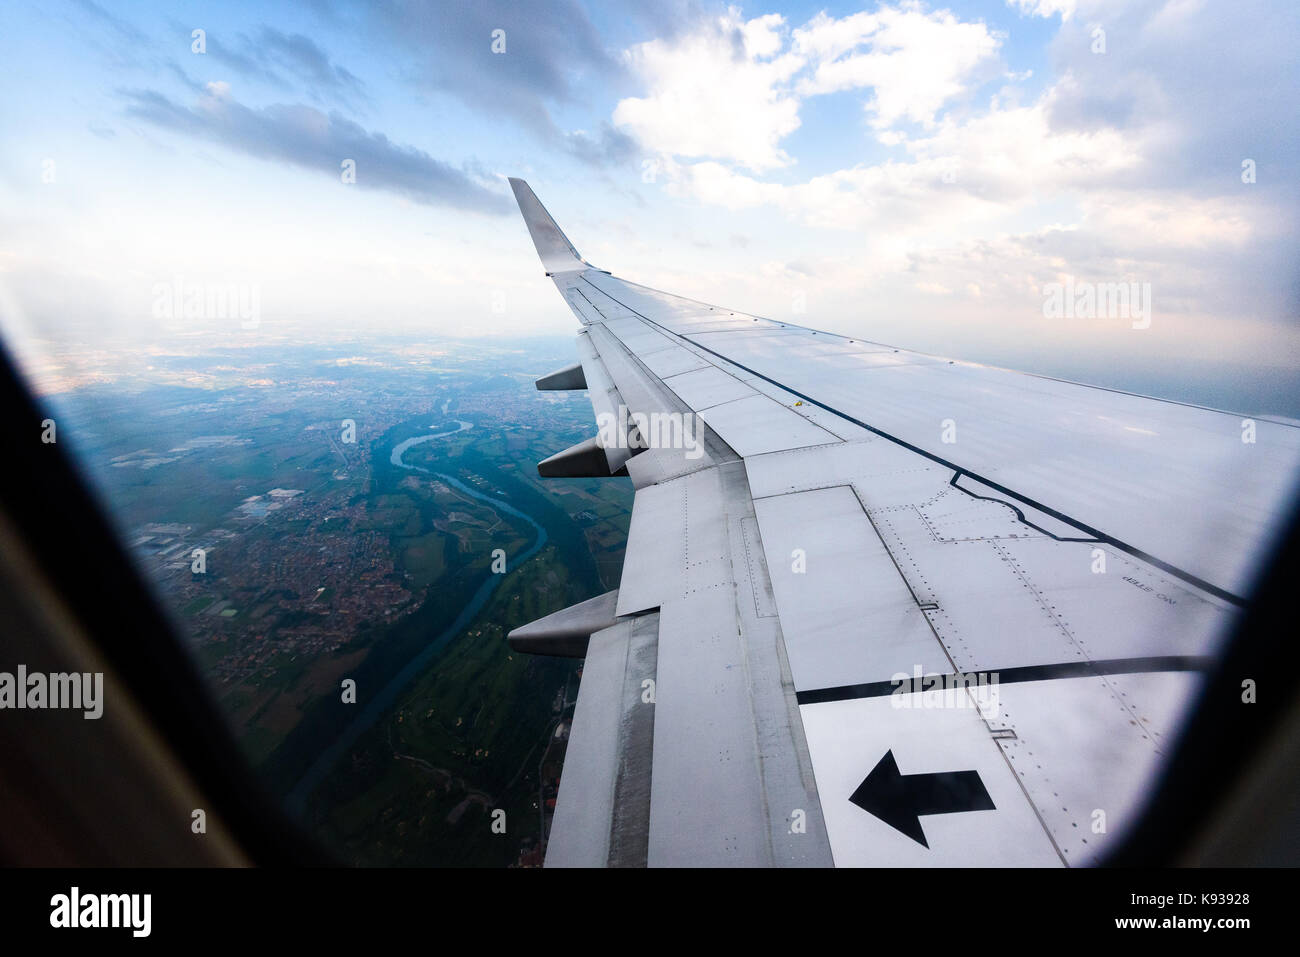 Looking trough window of an aircraft, airplane or plane wing. View from plane window during landing or takeoff over the city urban area. Stock Photo